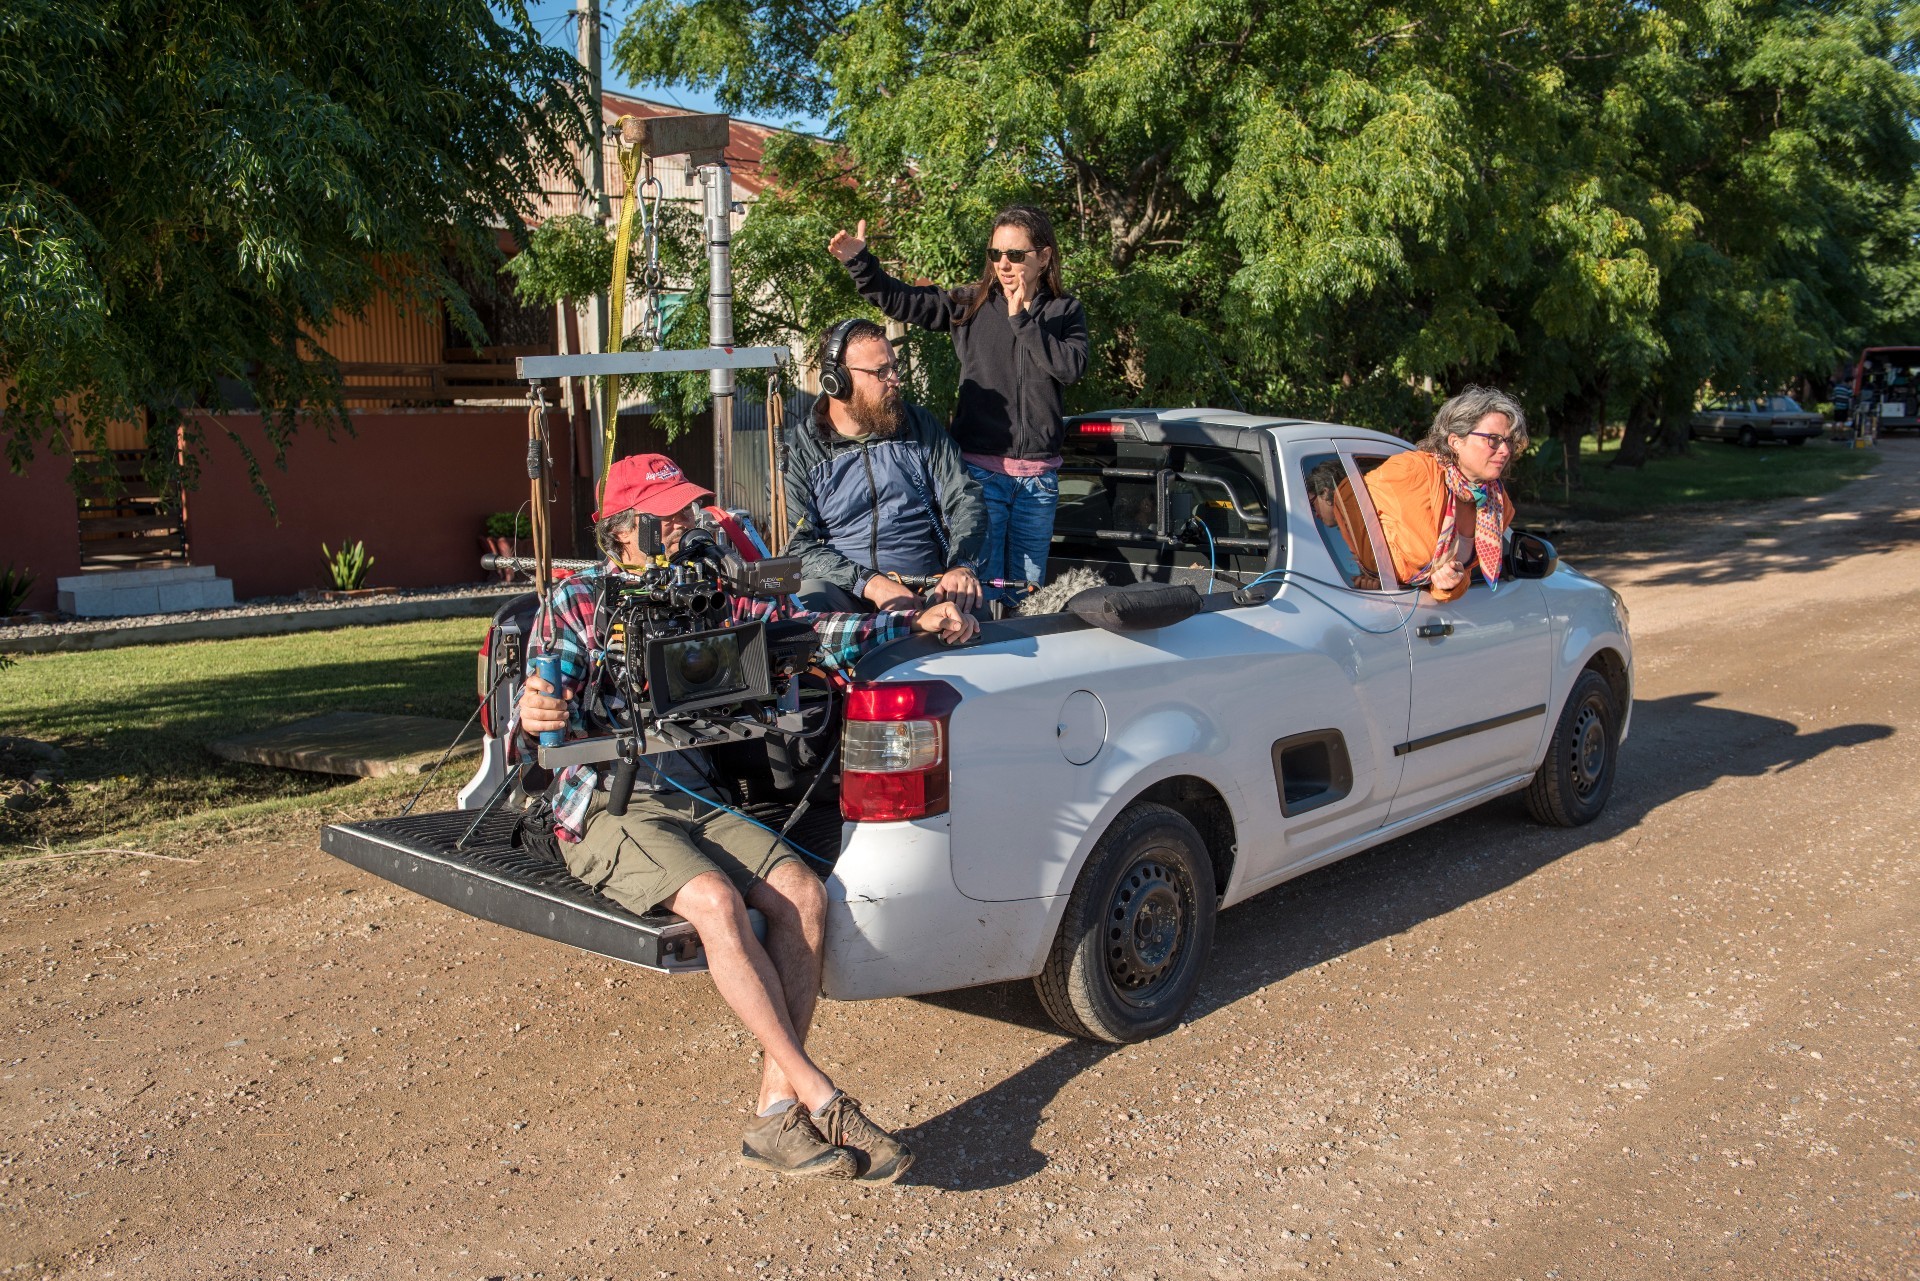 Katherine Jerkovic with her film crew in a car rig.